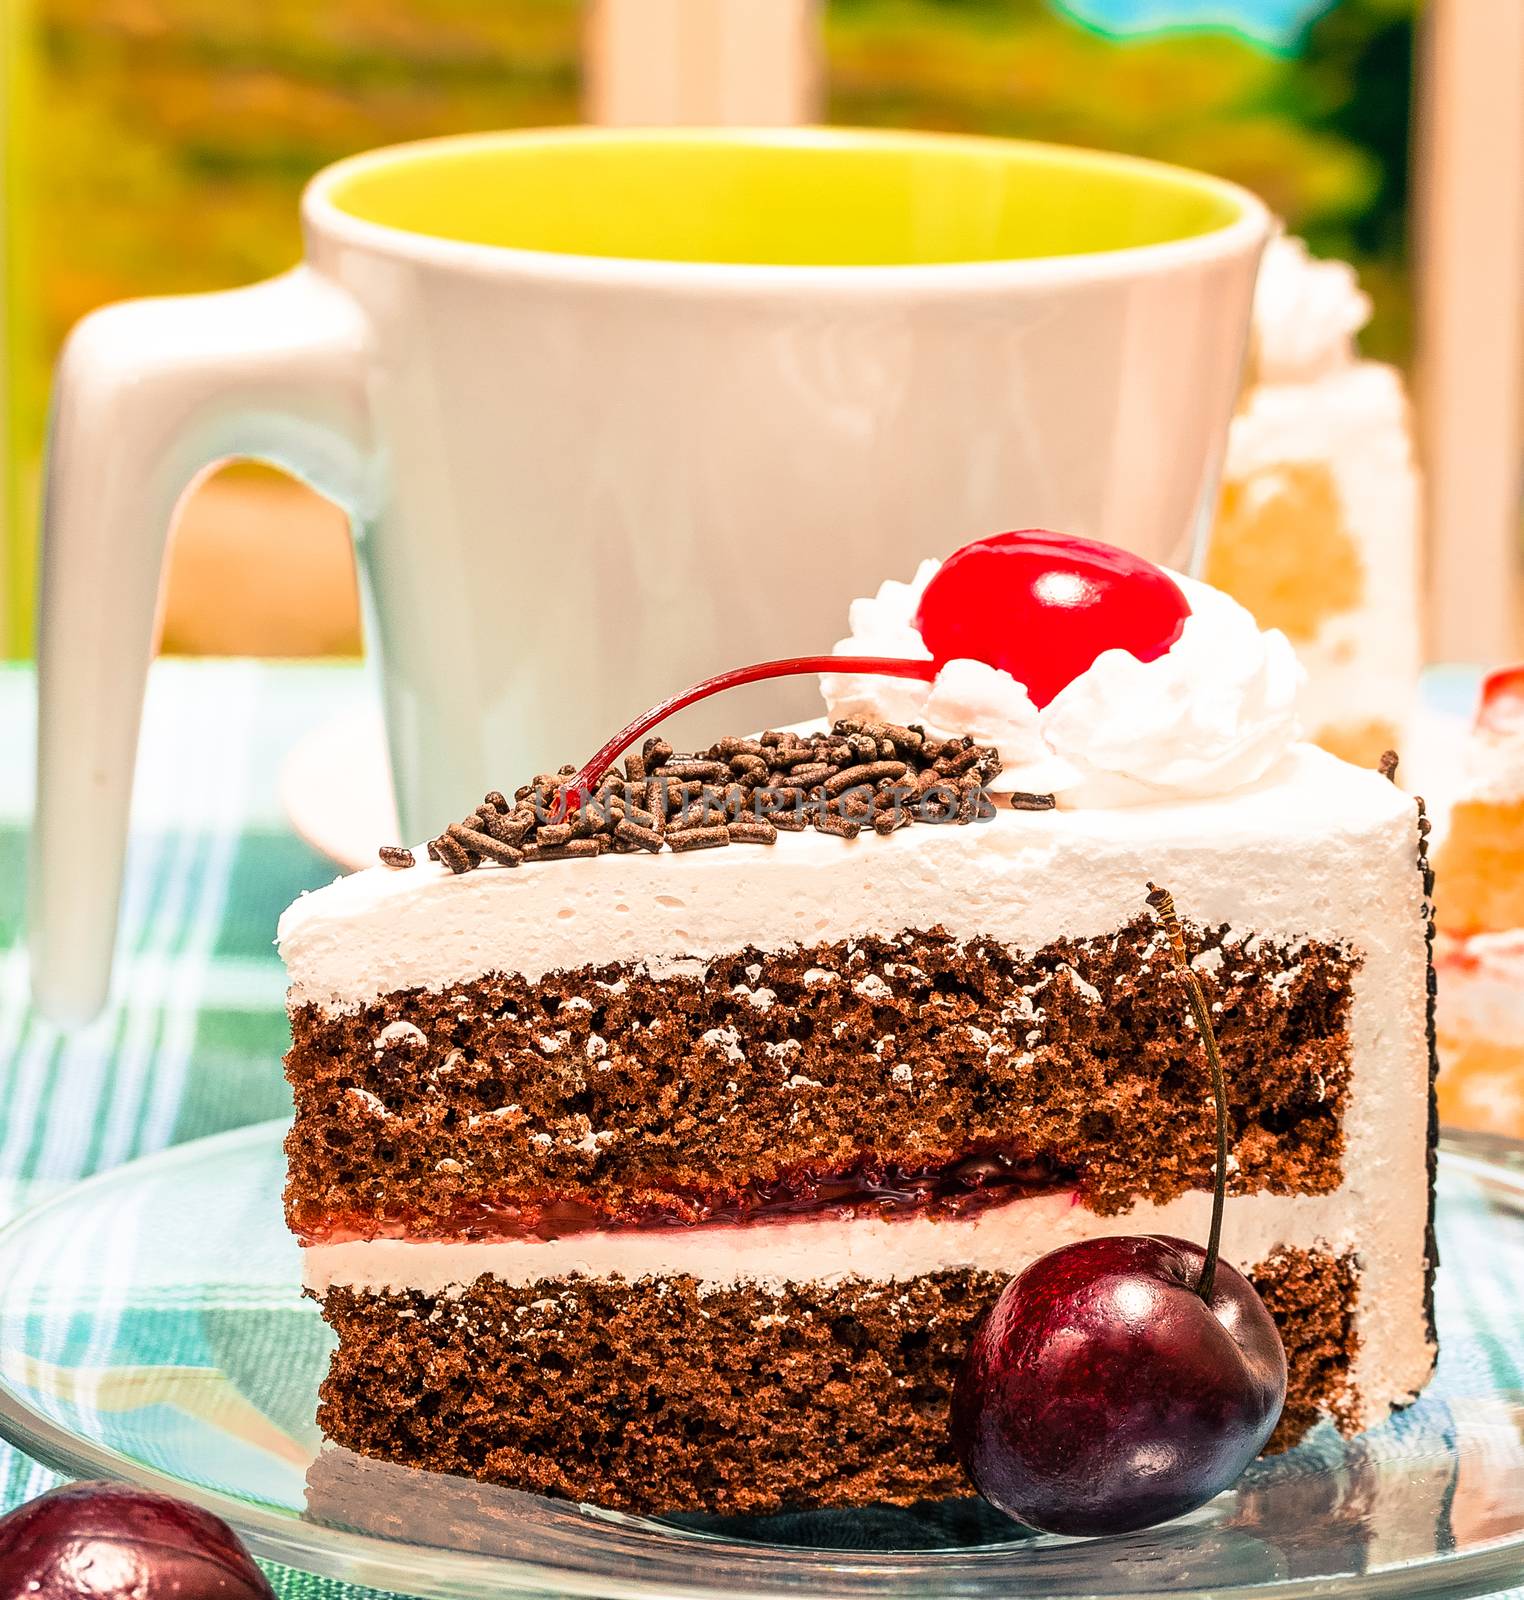 Black Forest Cake Showing Coffee Break And Creamy